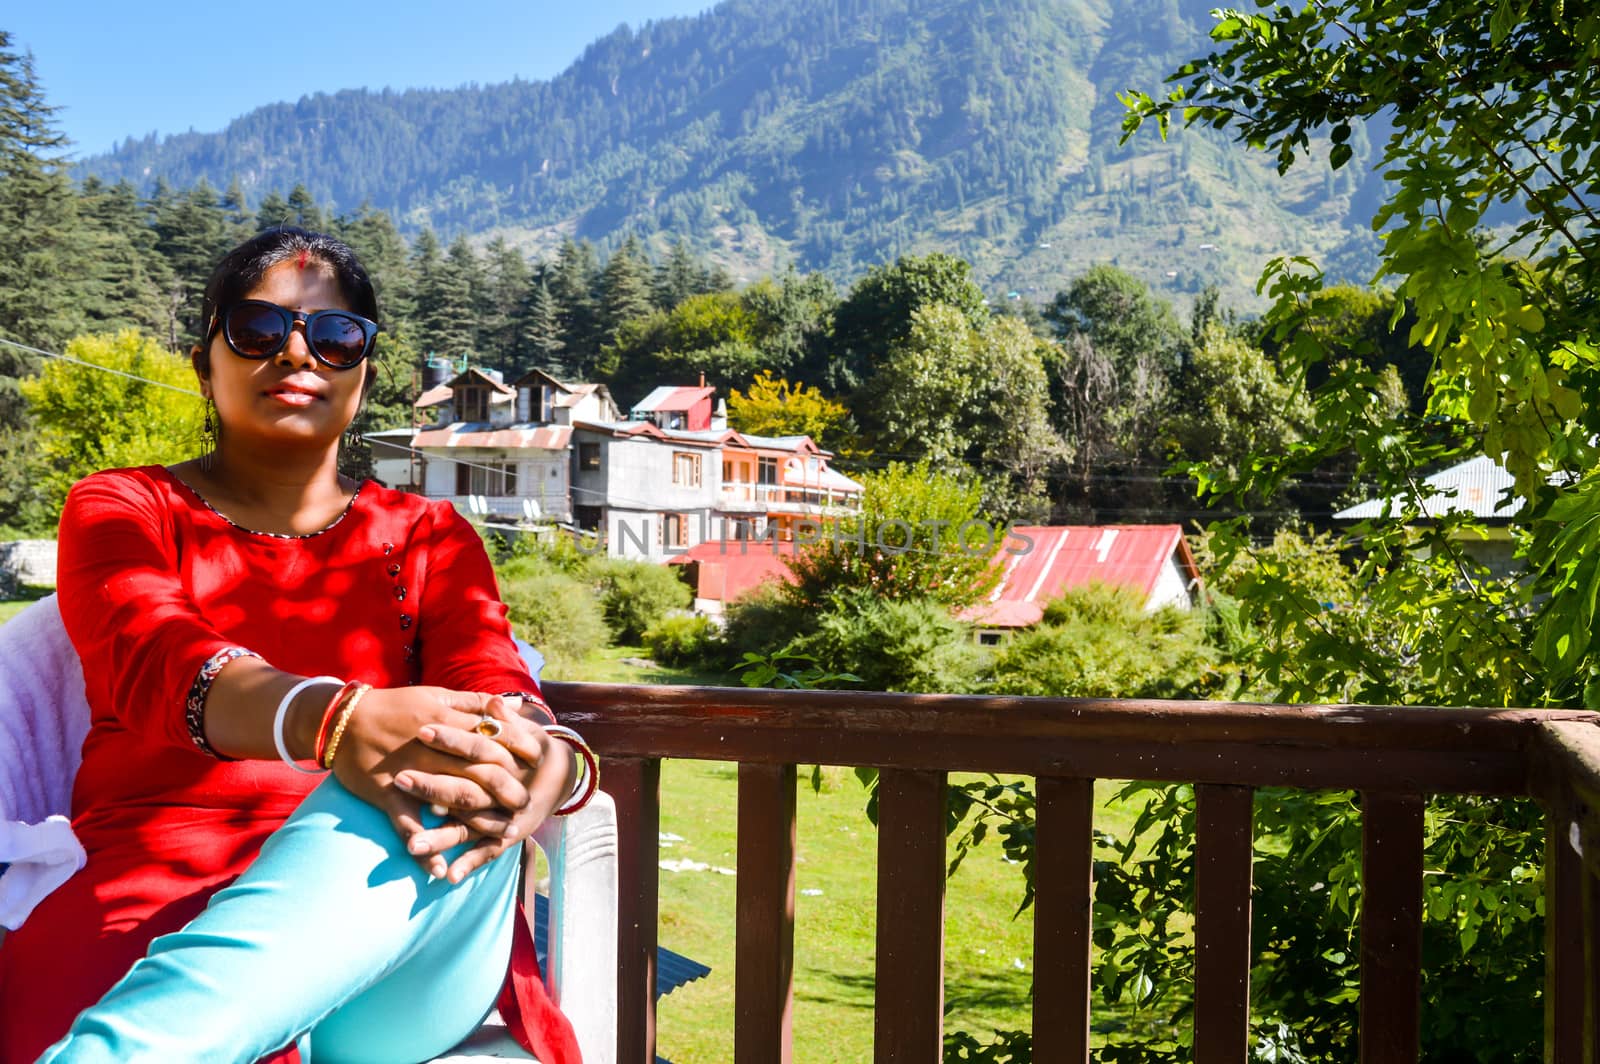 A lady resting or relaxing in balcony of a luxury resort bungalow in morning in the heart of Manali City, Himachal Pradesh, Kullu, India. It is a popular tourist destination in northern India.